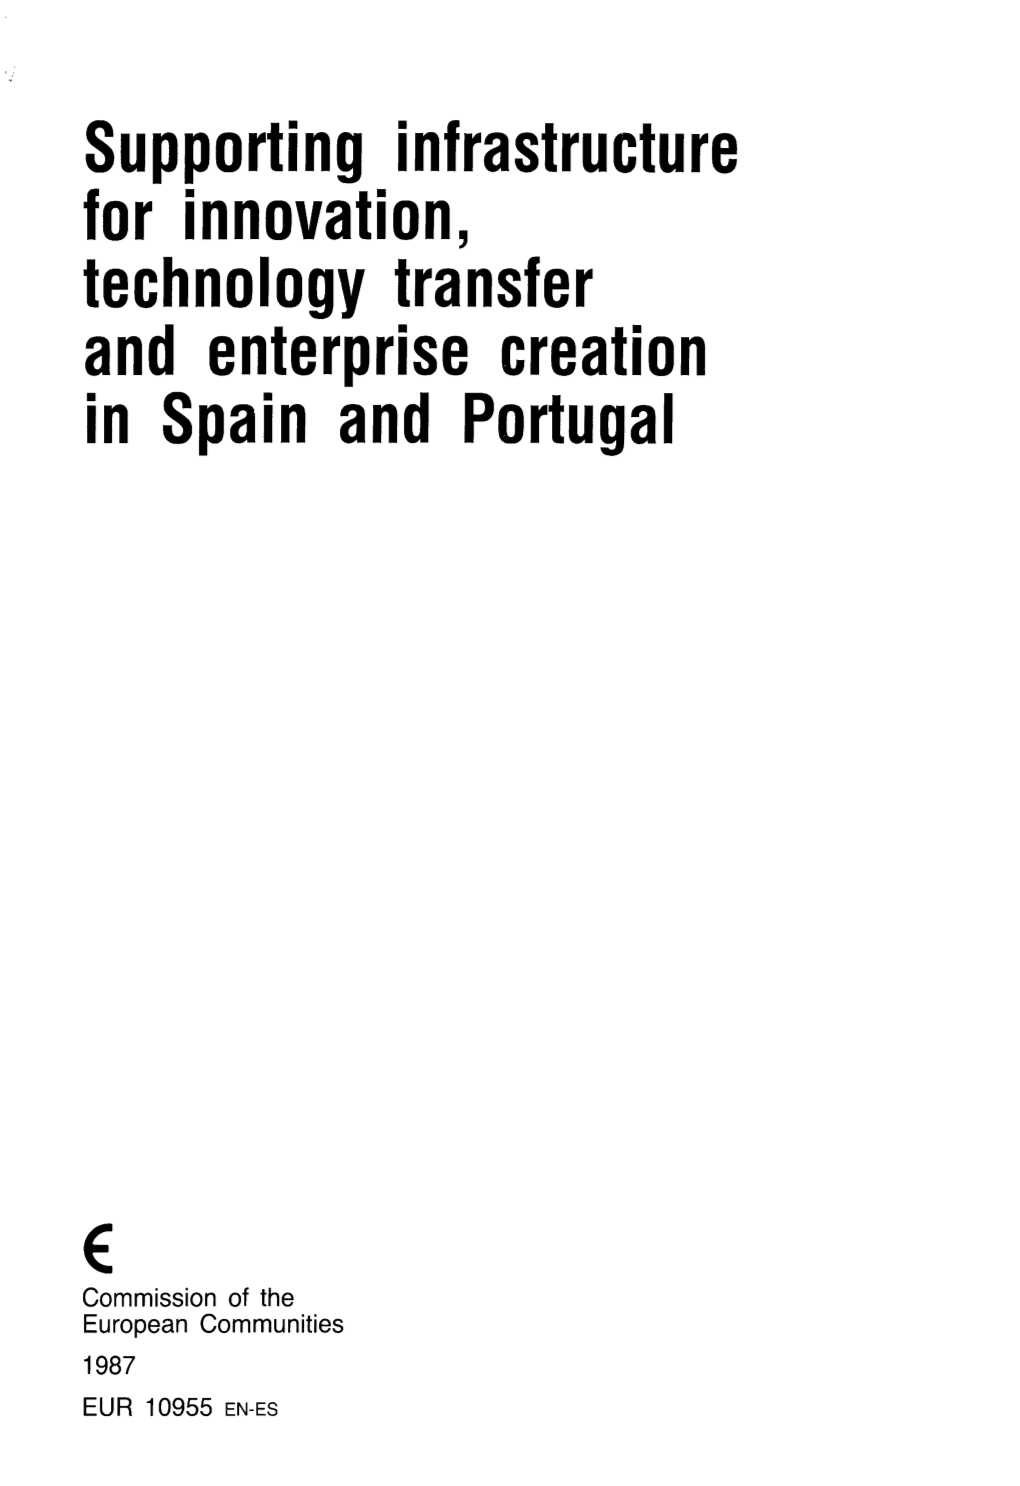 Supporting Infrastructure for Innovation, Technology Transfer and Enterprise Creation in Spain and Portugal